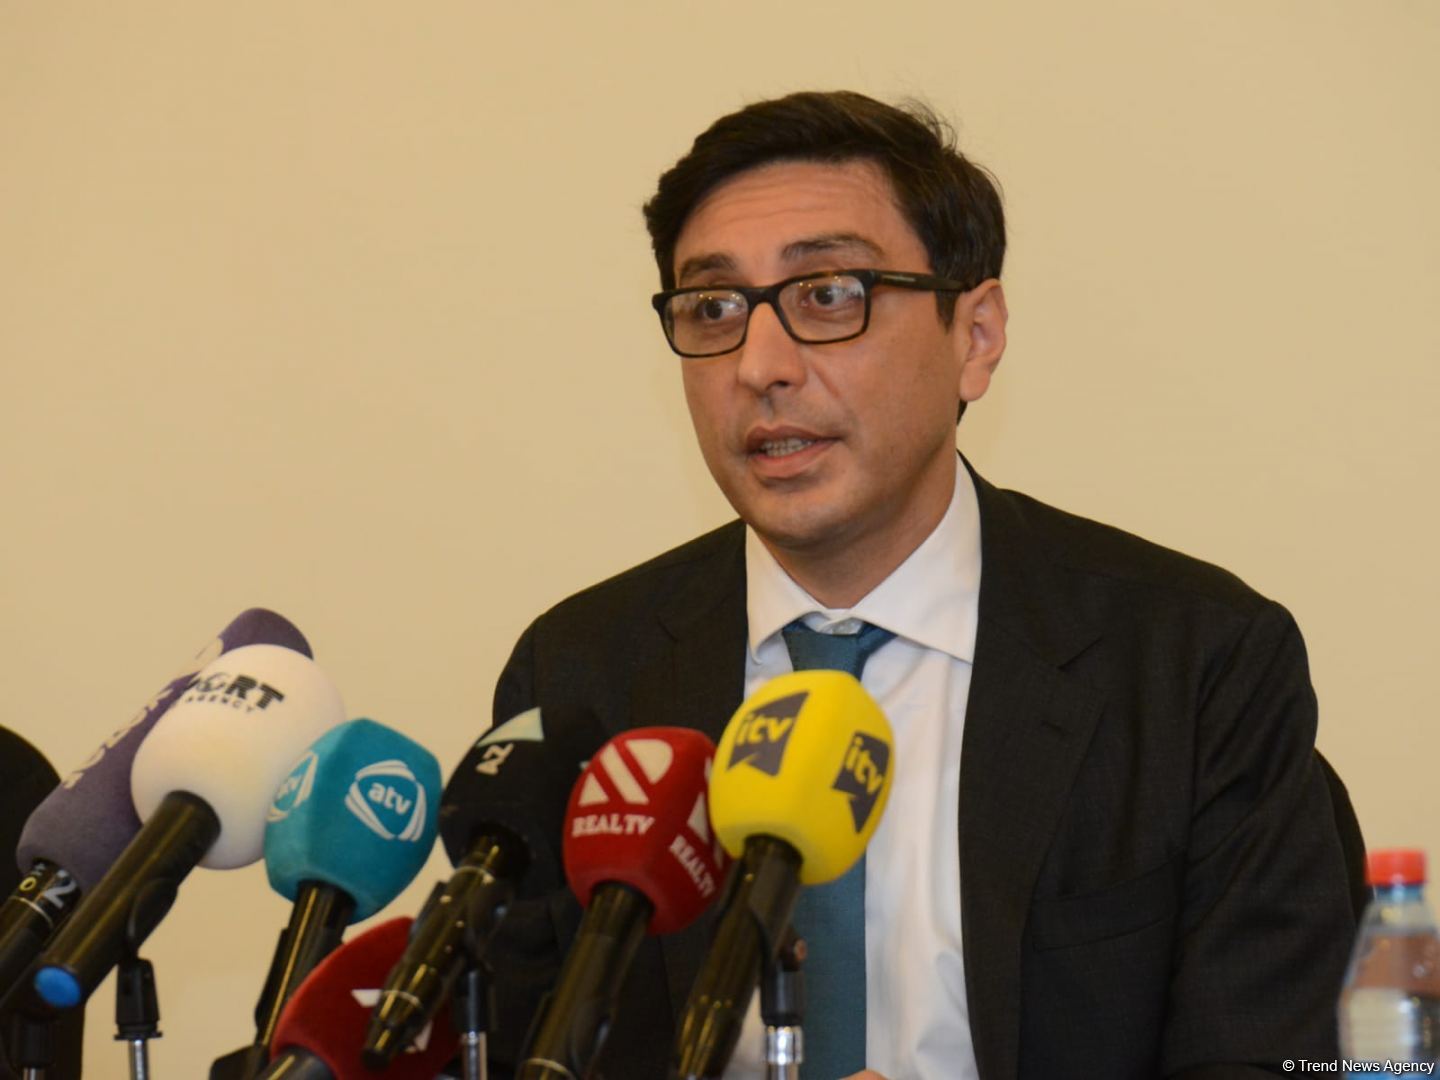 Azerbaijan's newly-appointed Minister of Youth and Sports introduced to ministry's staff (PHOTO)